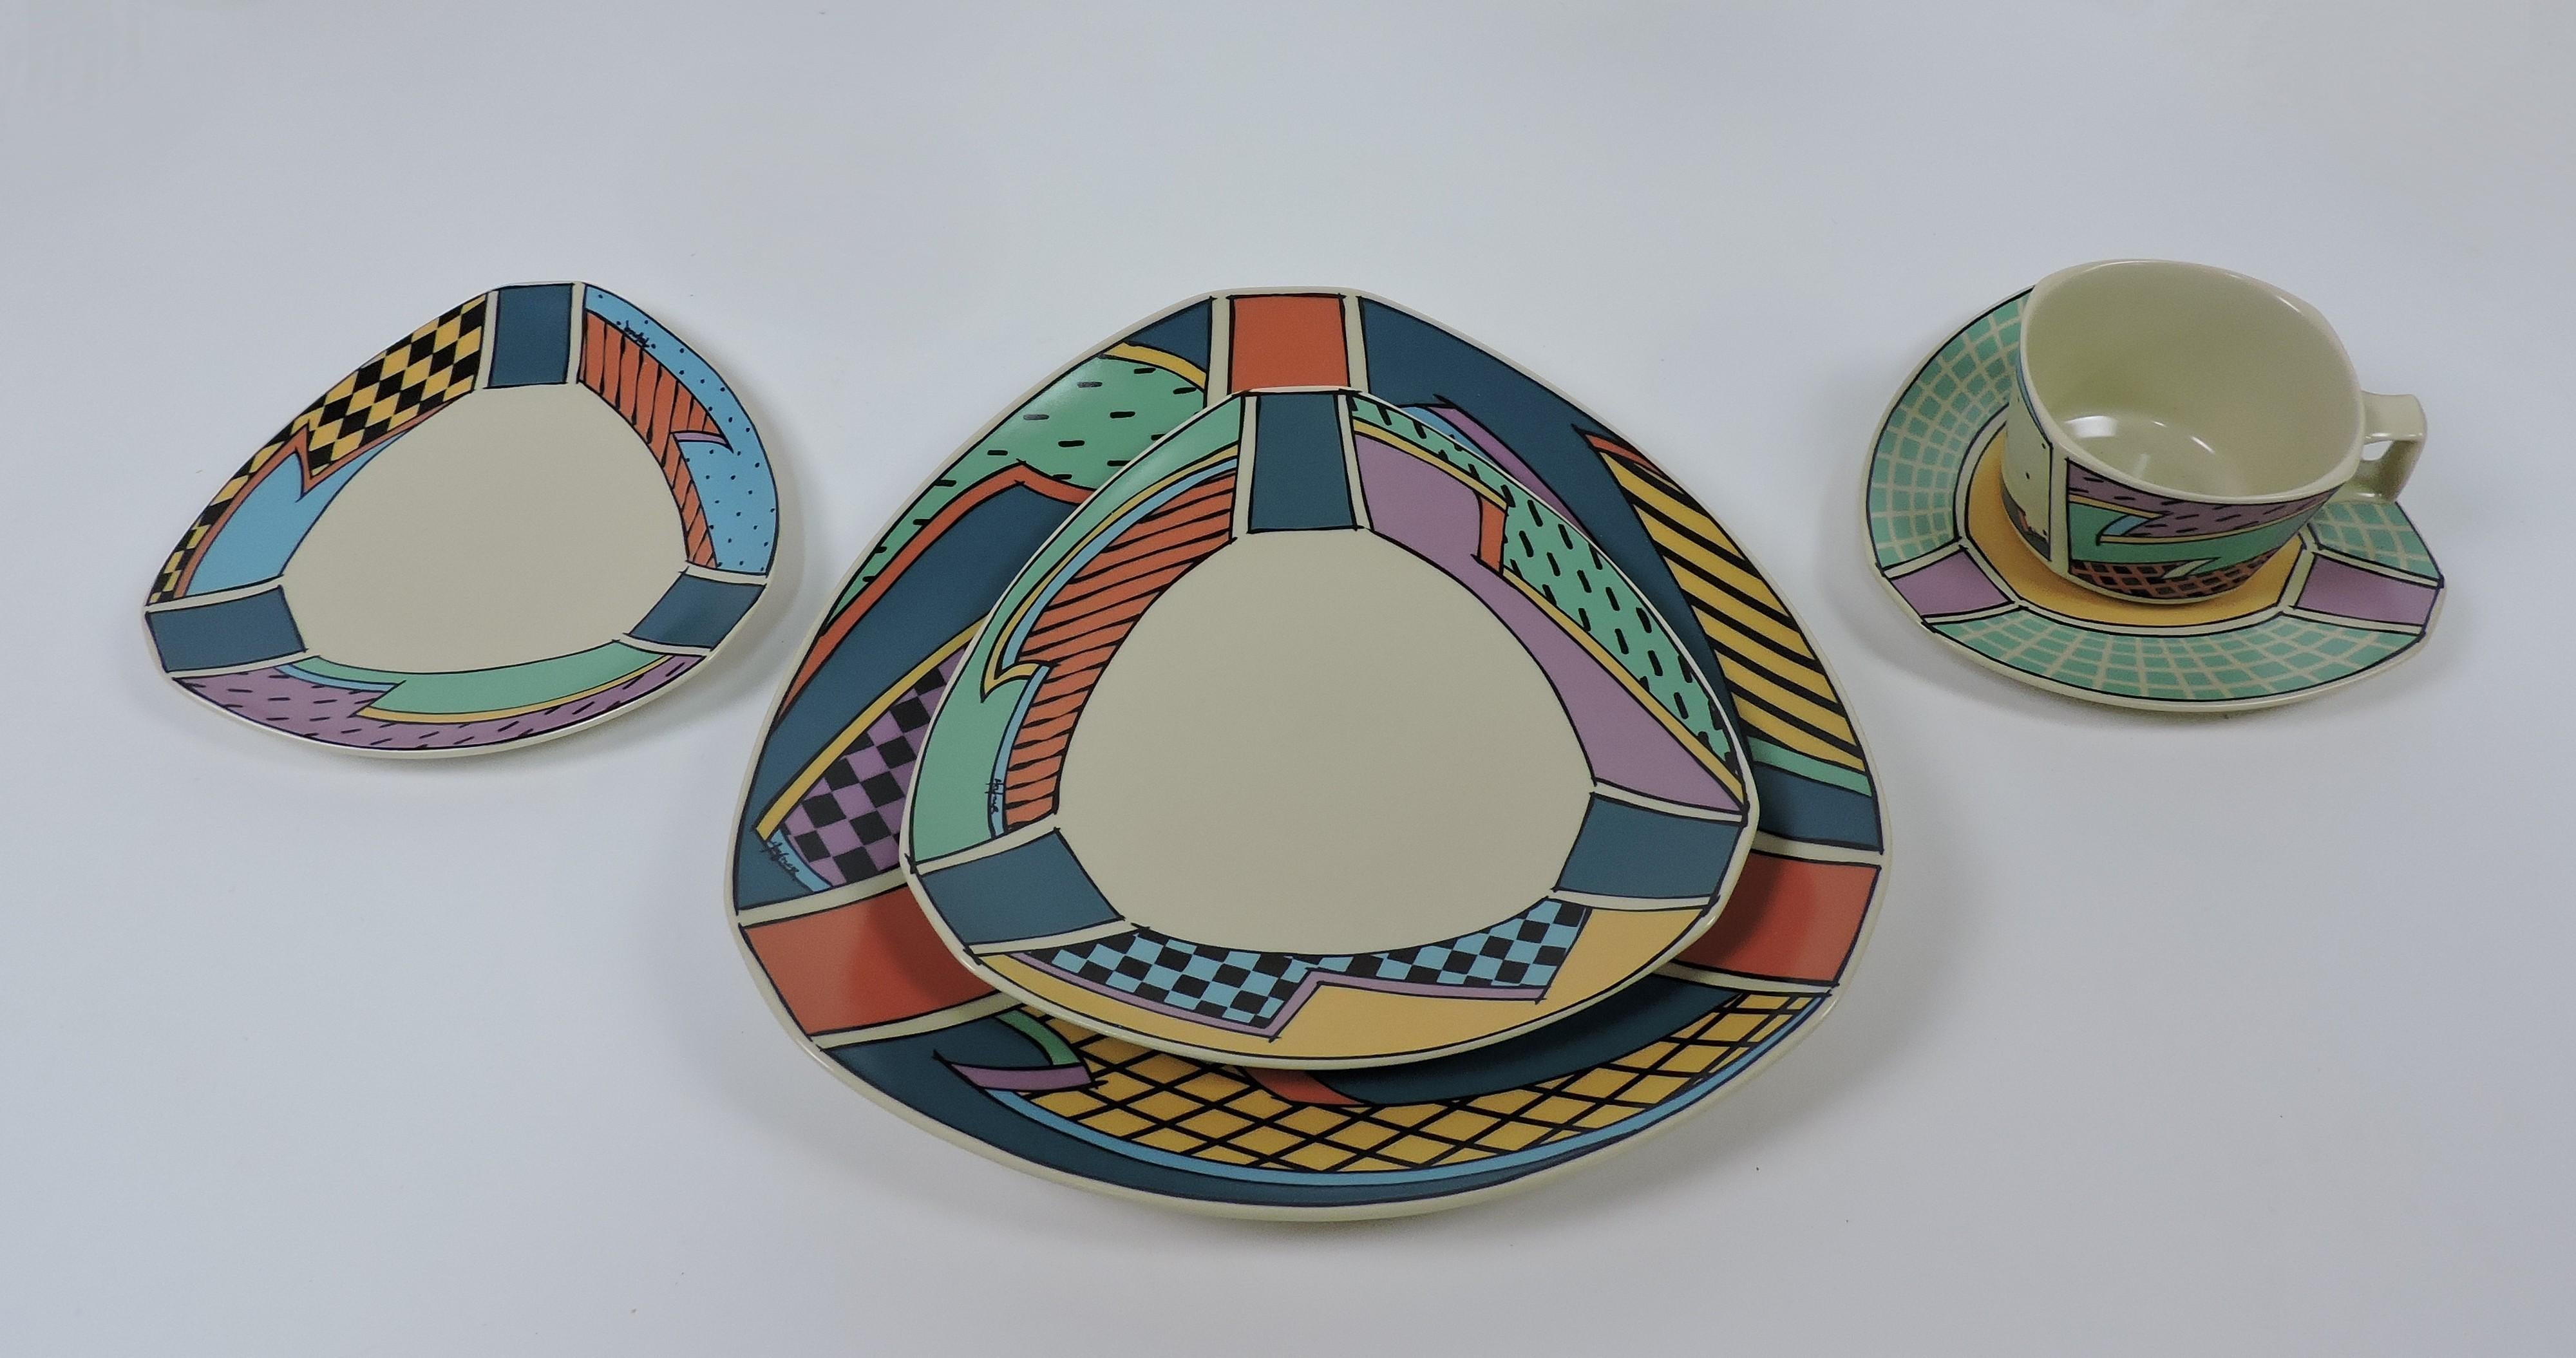 Large set of Memphis style Flash series porcelain dinnerware for twelve designed in 1982 by noted American ceramist and glass artist, Dorothy Hafner, and manufactured in Germany by Rosenthal. This iconic set has an exuberant pattern of dots, checks,